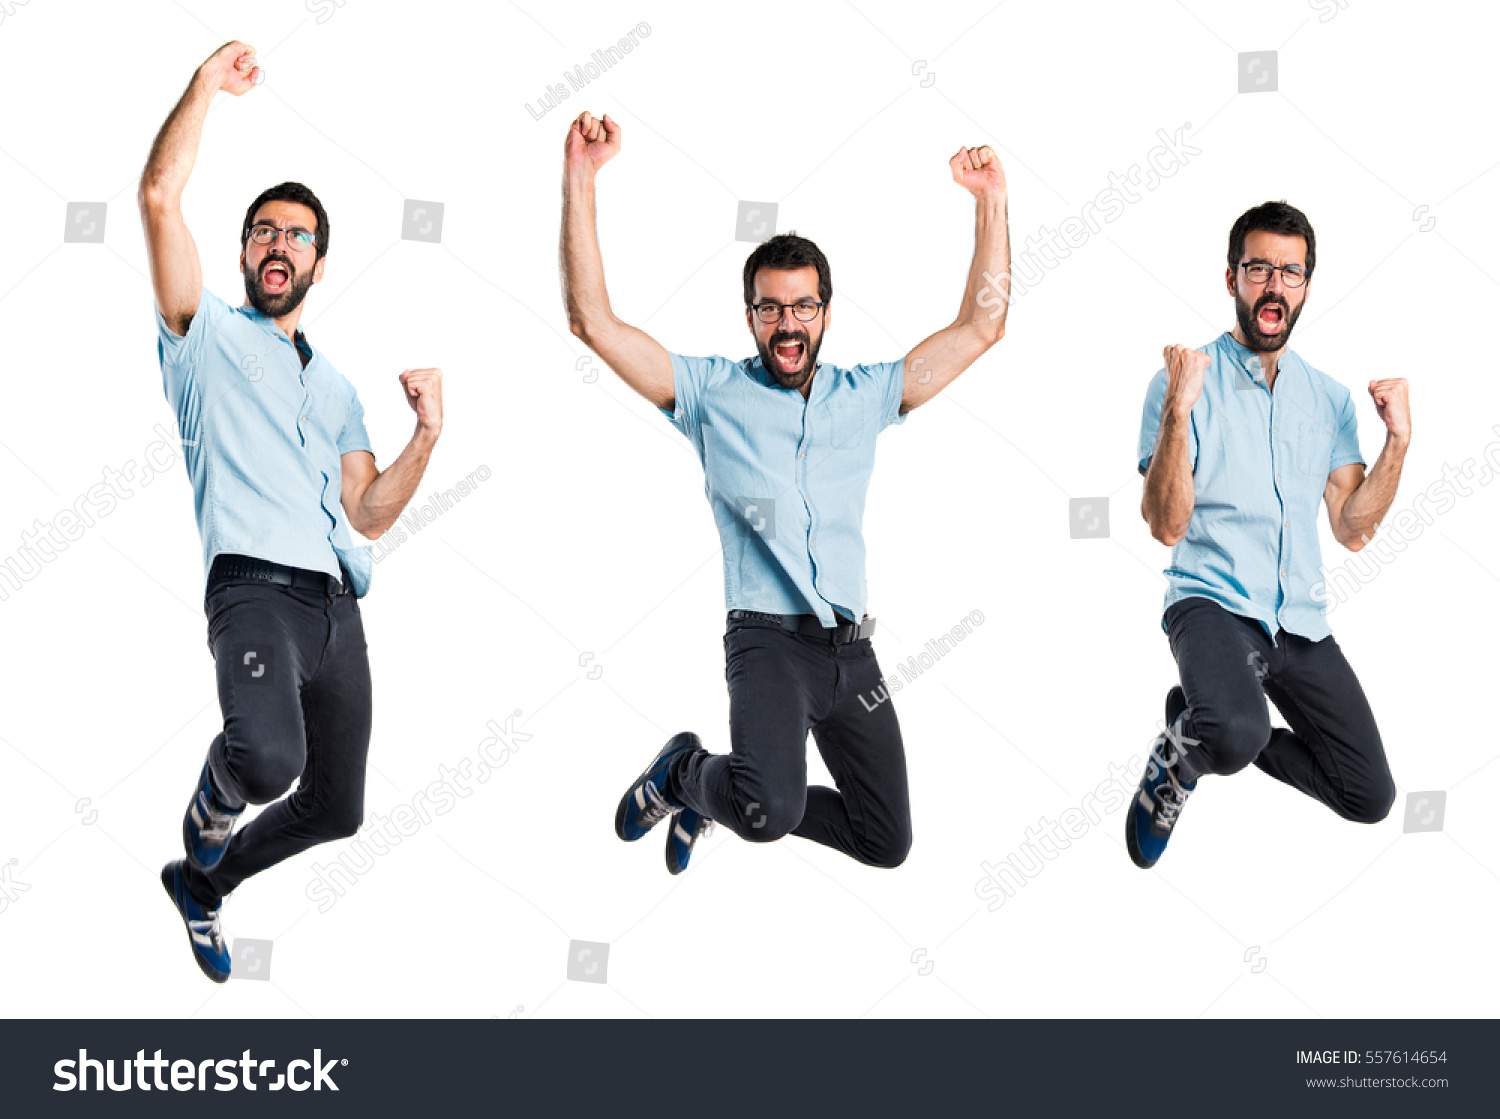 Handsome man with blue glasses jumping #557614654